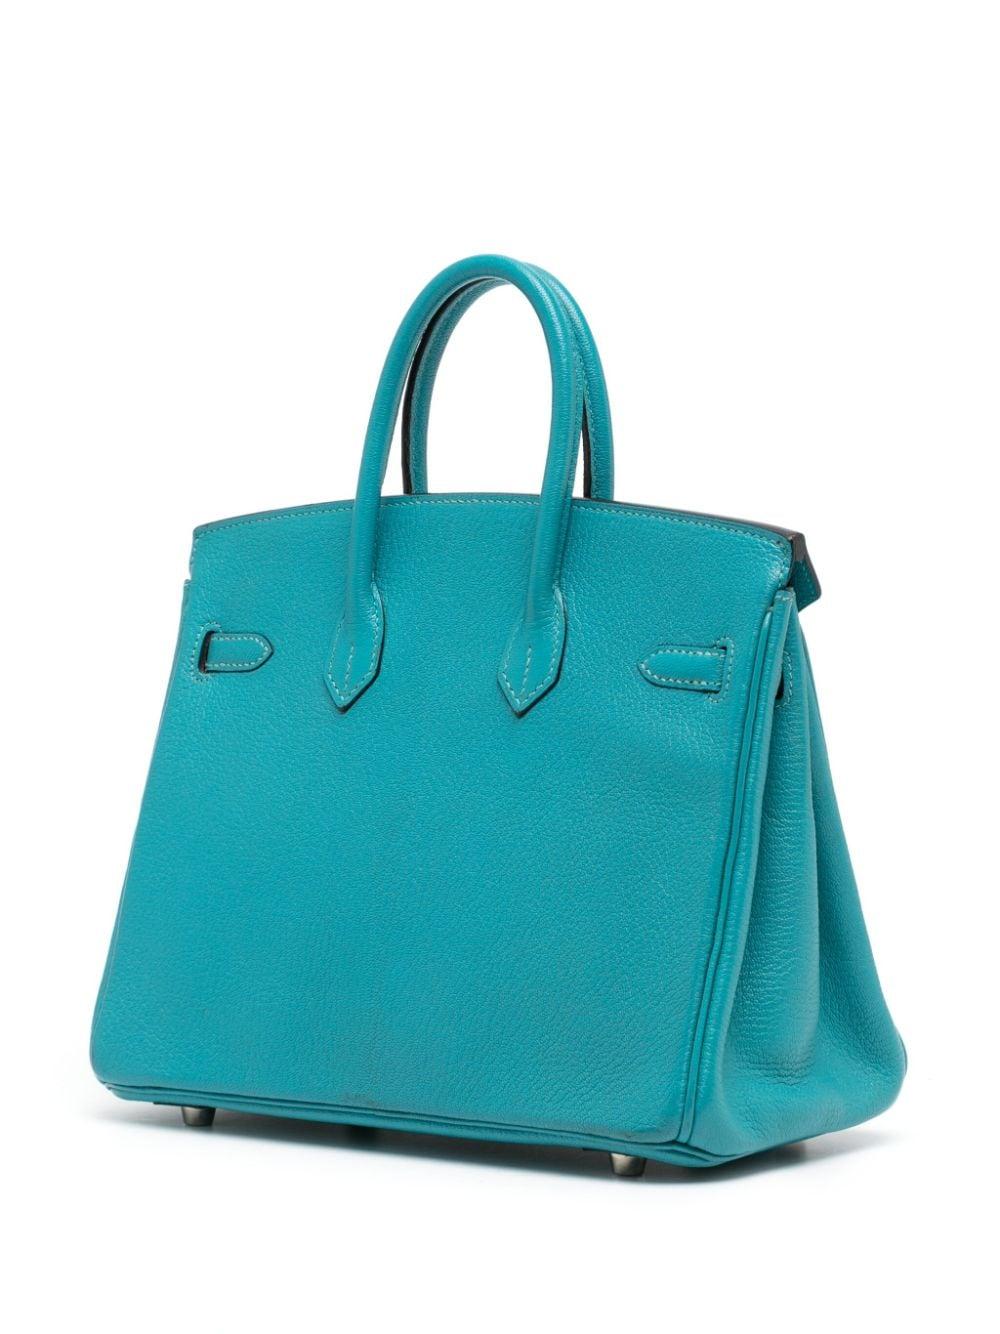 This Hermès Birkin 25 in Turquoise is a standout piece for your collection. Handcrafted from Chevre leather, it's big enough to carry your essentials and works from day to night. With minimal wear, this sought-after 2005 Birkin bag (